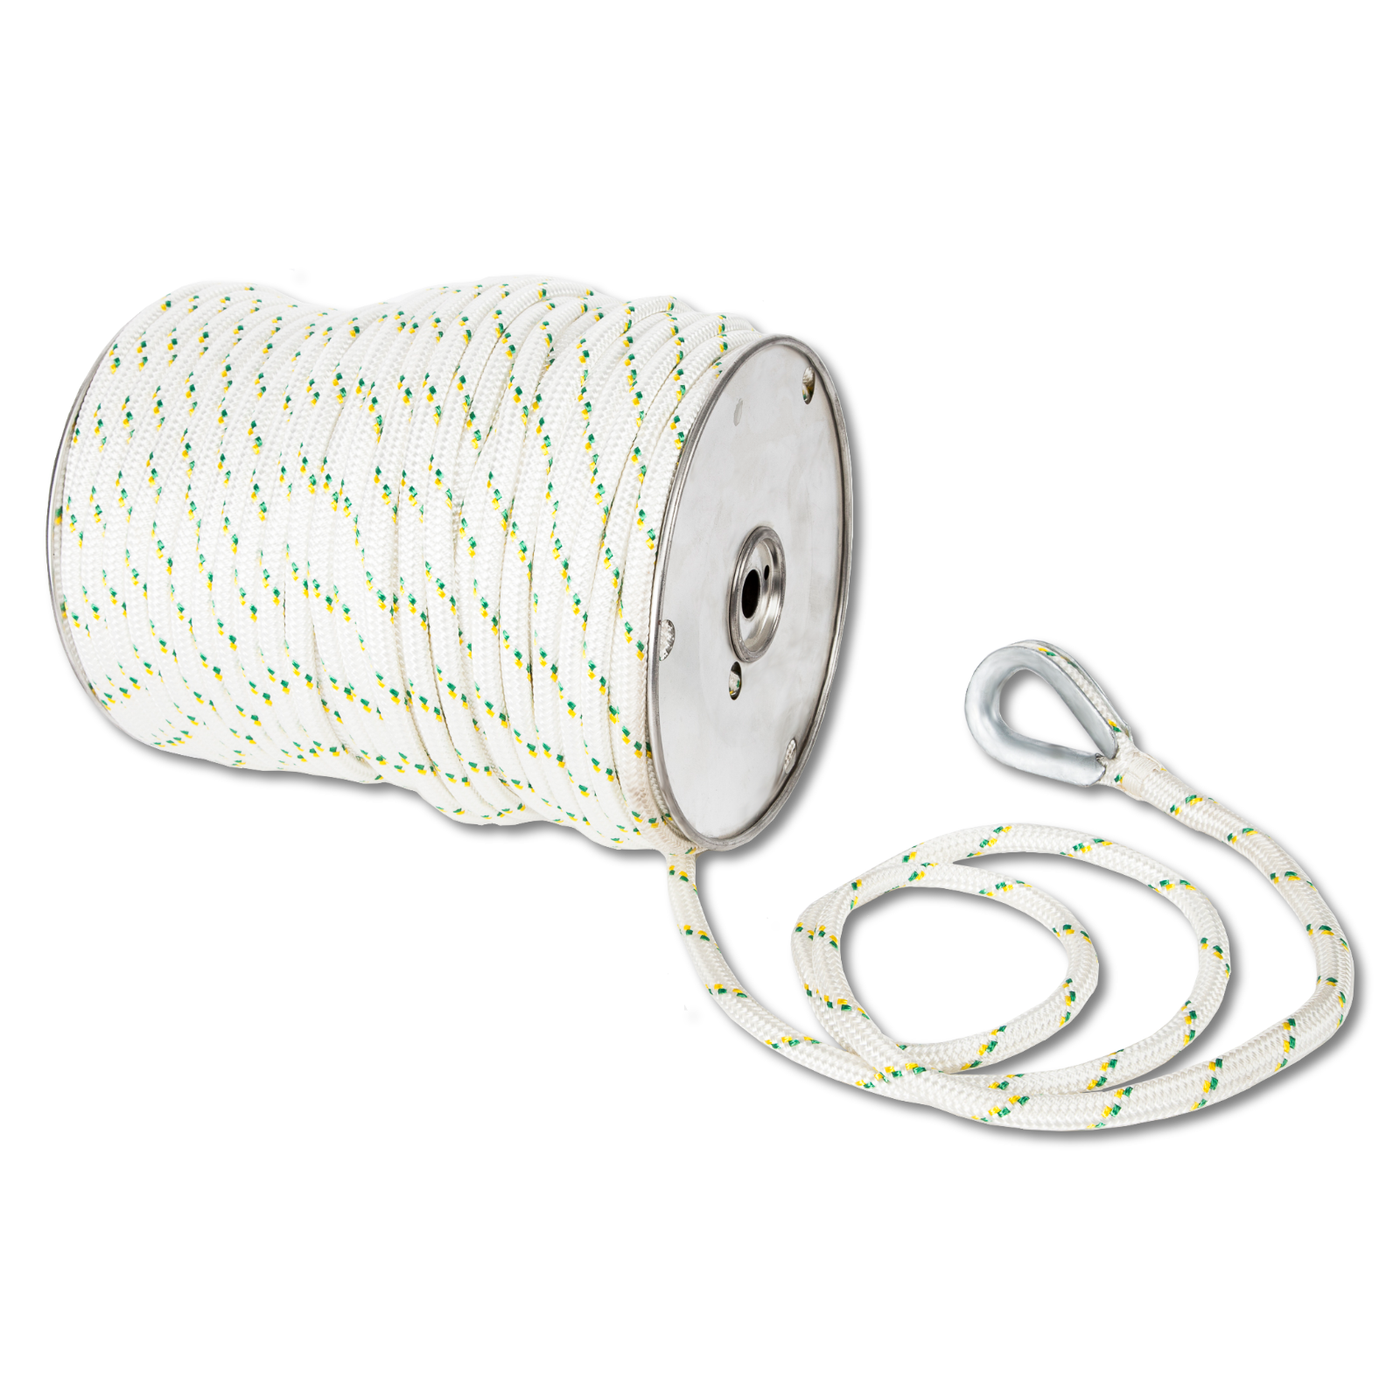 Ø 10 MM Double-Braided Polyester Rope with Splices and Thimbles